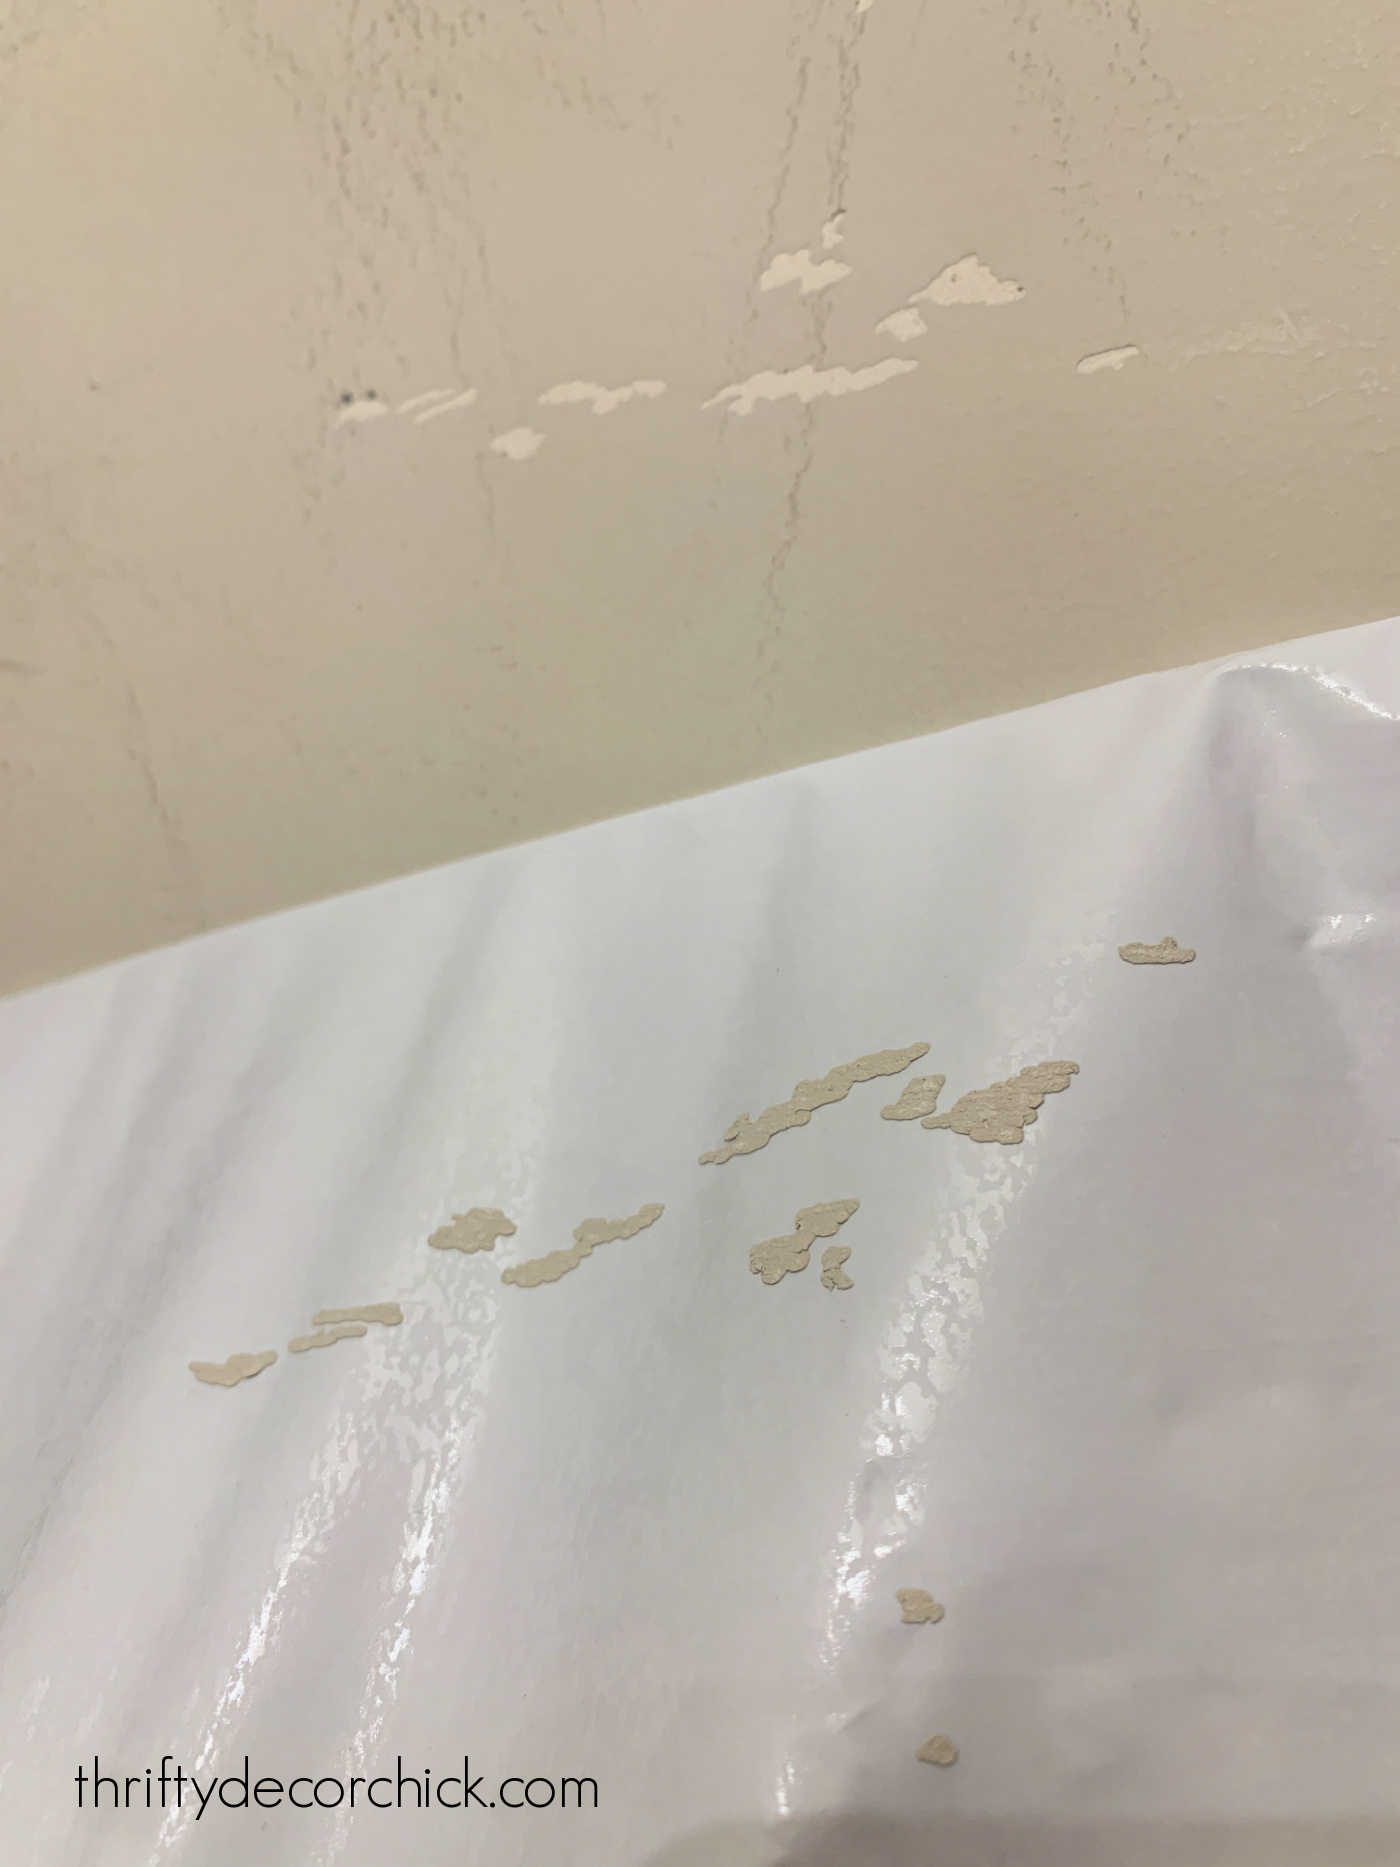 Drywall damage sticky wallpaper